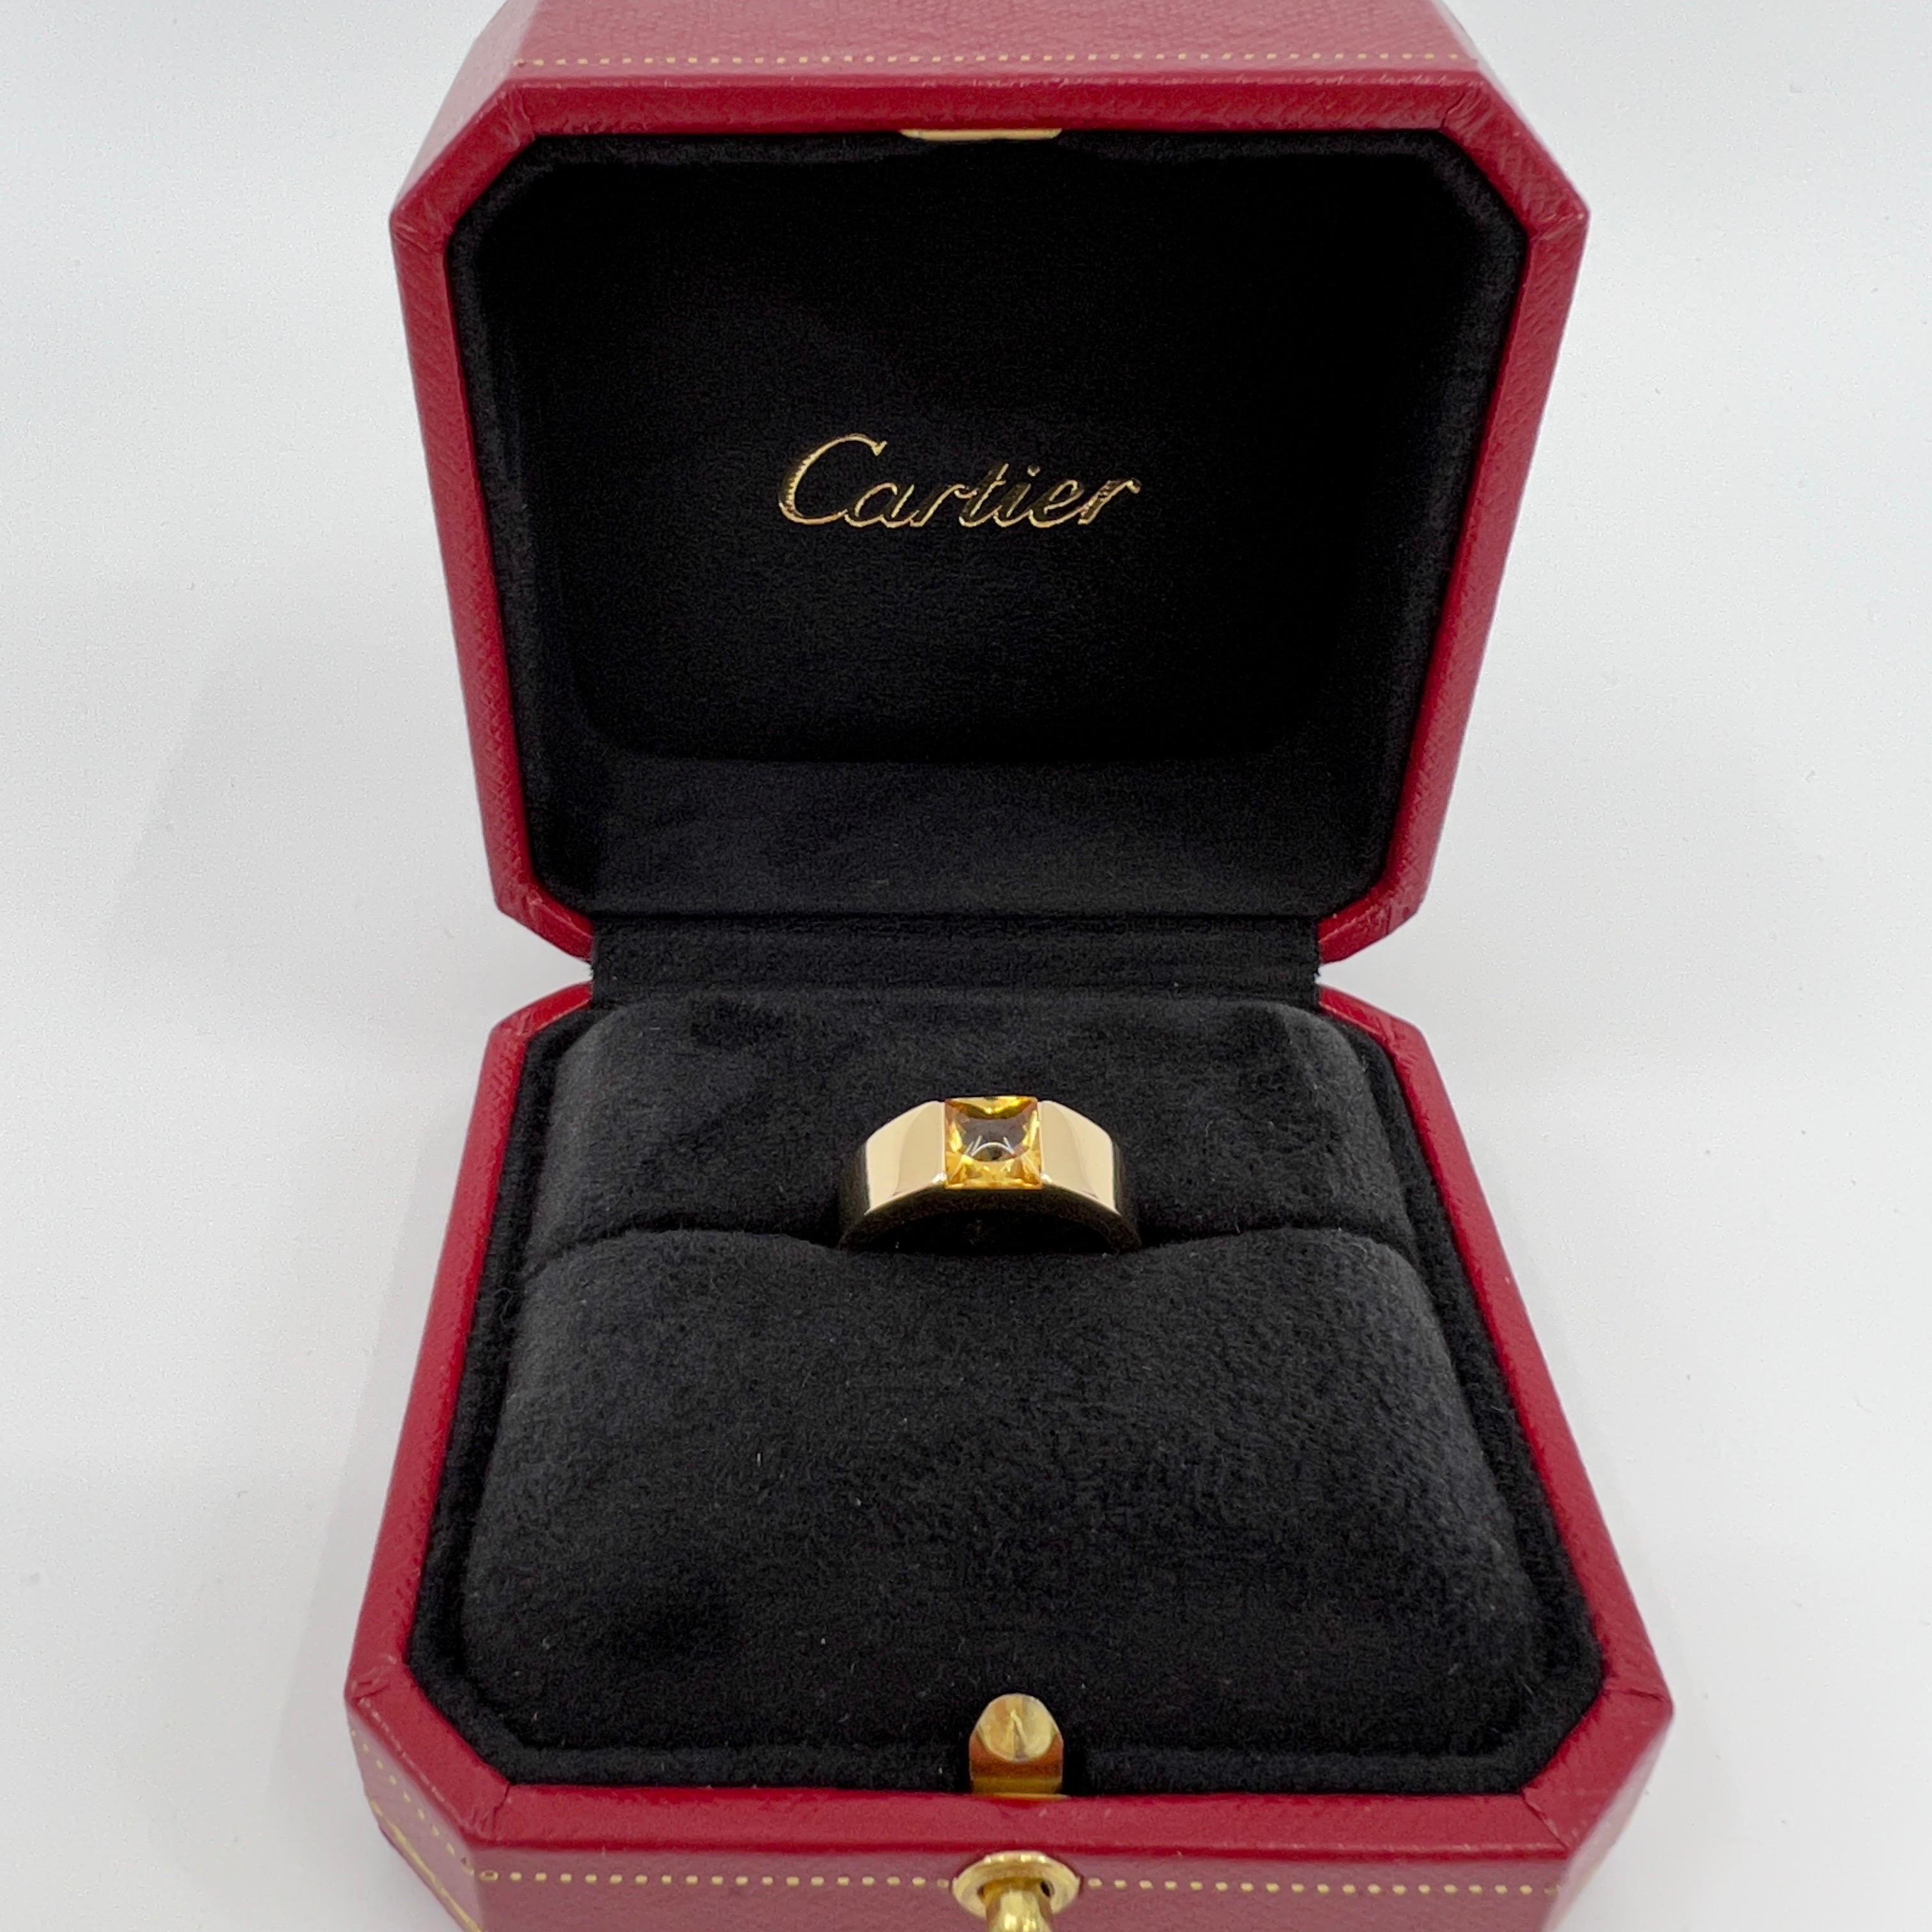 Cartier Vivid Yellow Orange Citrine 18k Yellow Gold Tank Ring.

Stunning yellow gold ring with a 6mm tension set vivid yellow orange citrine. Fine jewellery houses like Cartier only use the finest of gemstones and this citrine is no exception. A top